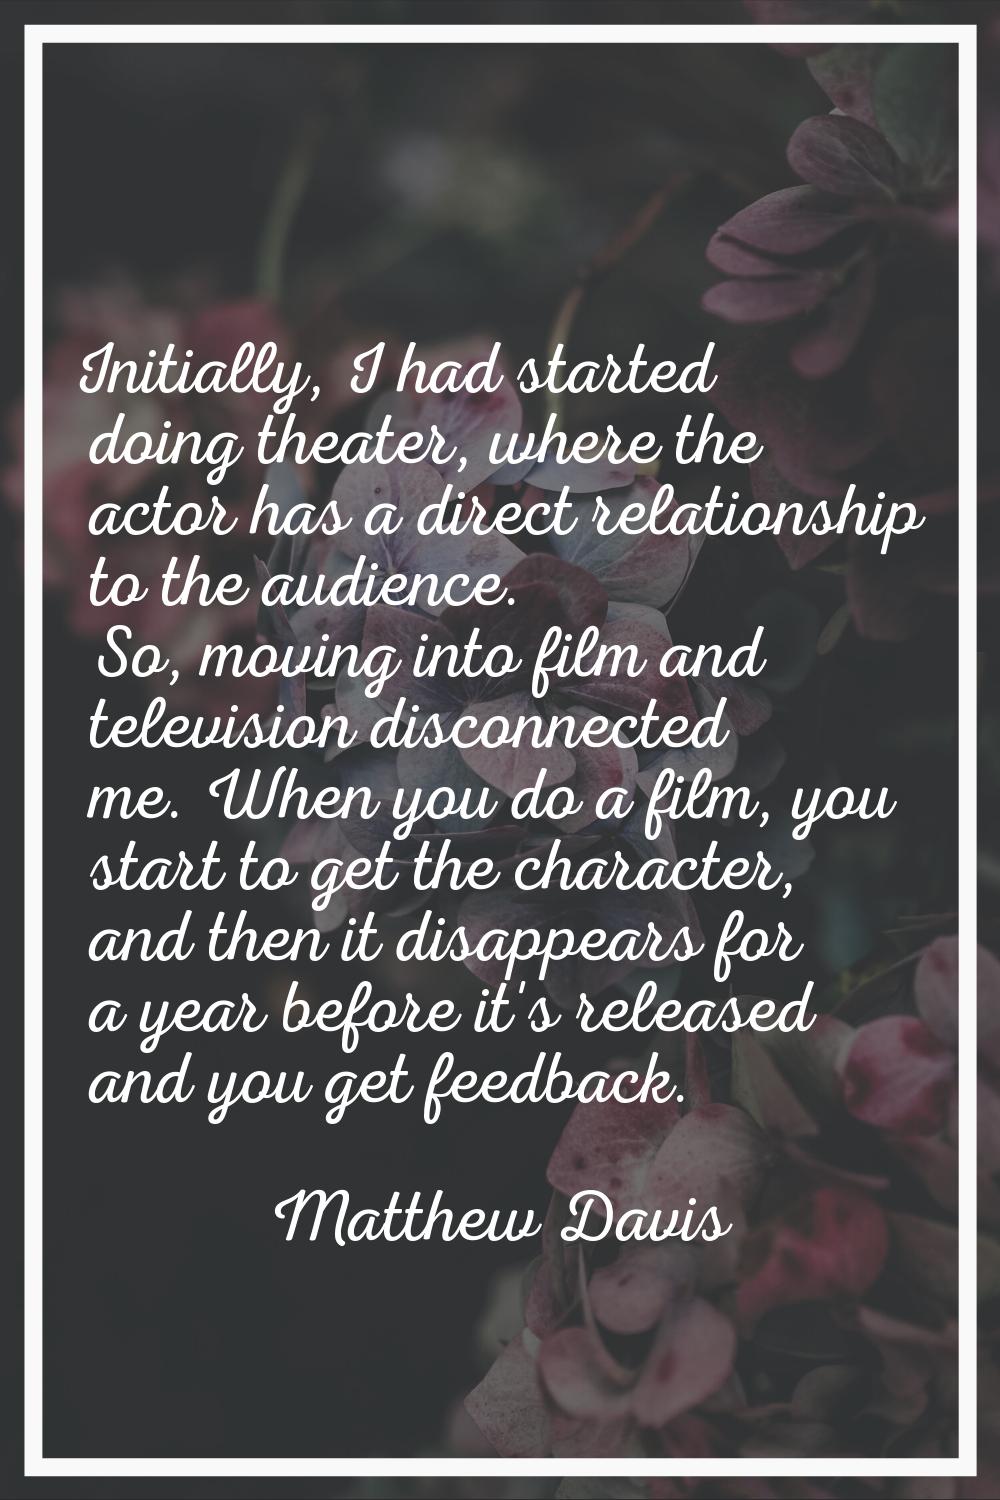 Initially, I had started doing theater, where the actor has a direct relationship to the audience. 